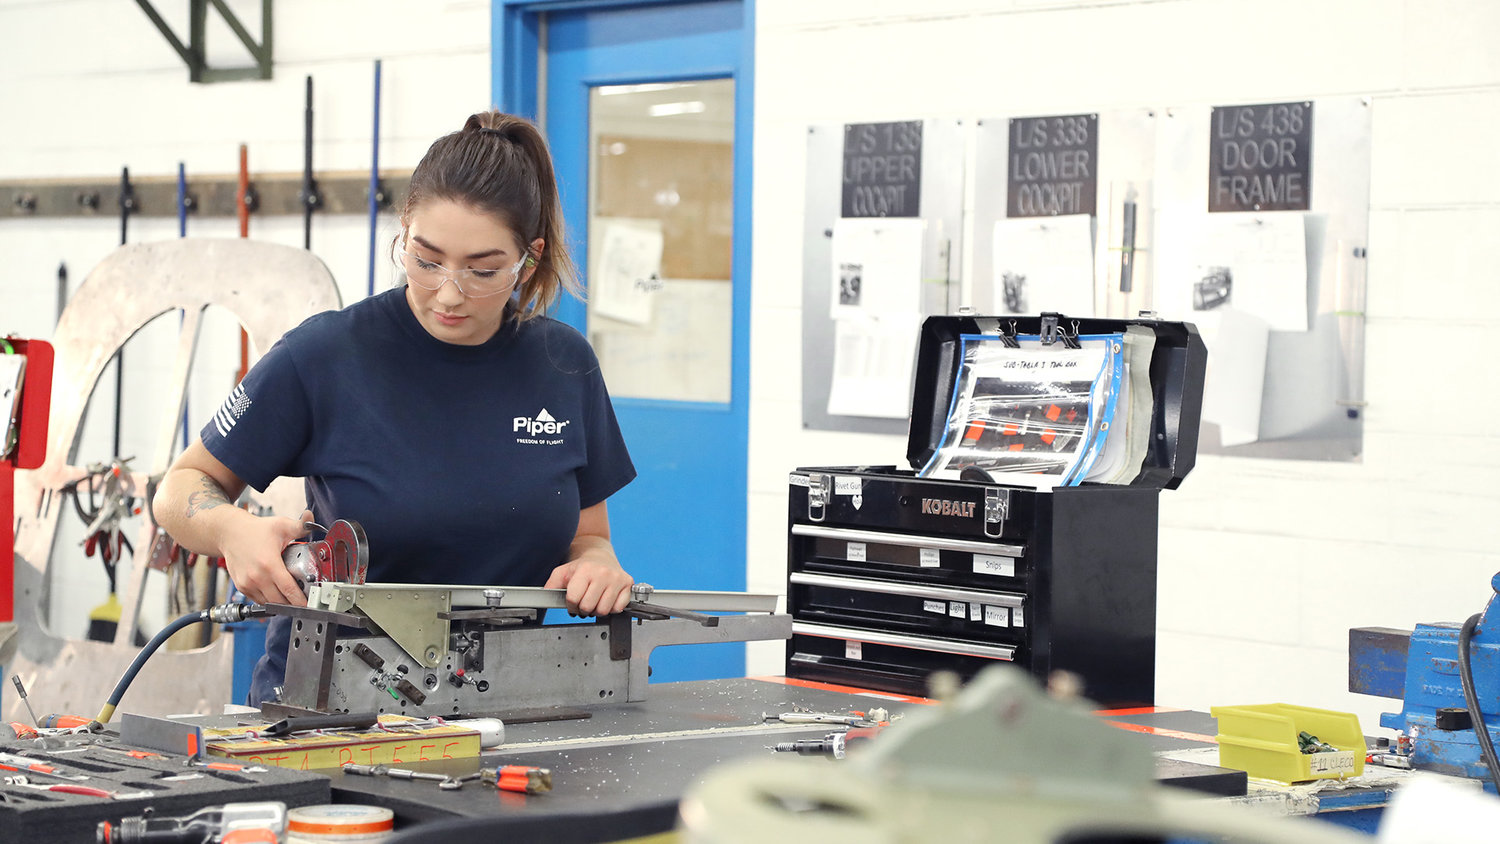 The two-year Aircraft Apprenticeship program, presented in cooperation with Indian River State College (IRSC), launched in 2019 in response to the increasing demand for high-quality manufacturing candidates at Piper Aircraft.